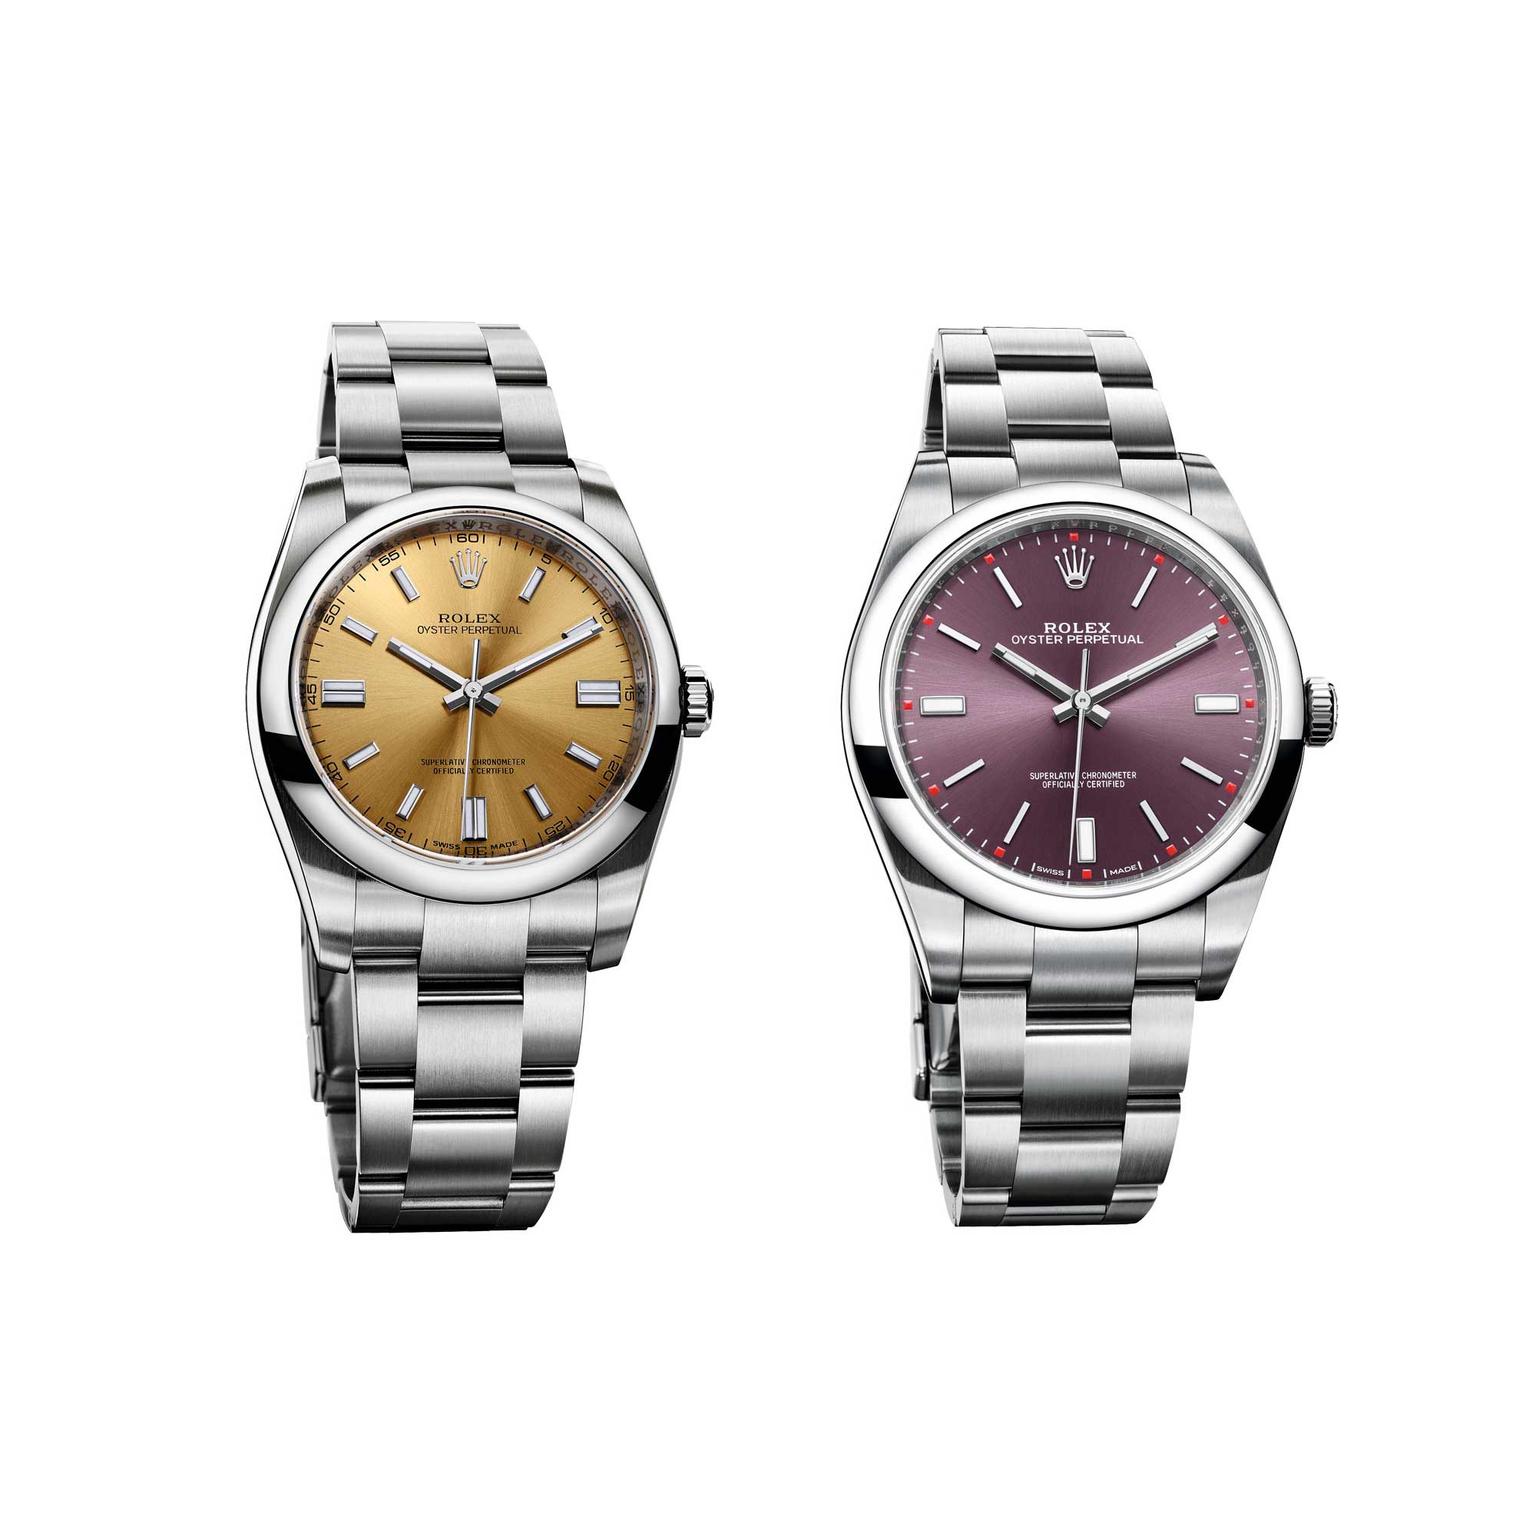 Rolex Oyster Perpetual white and red grape watches